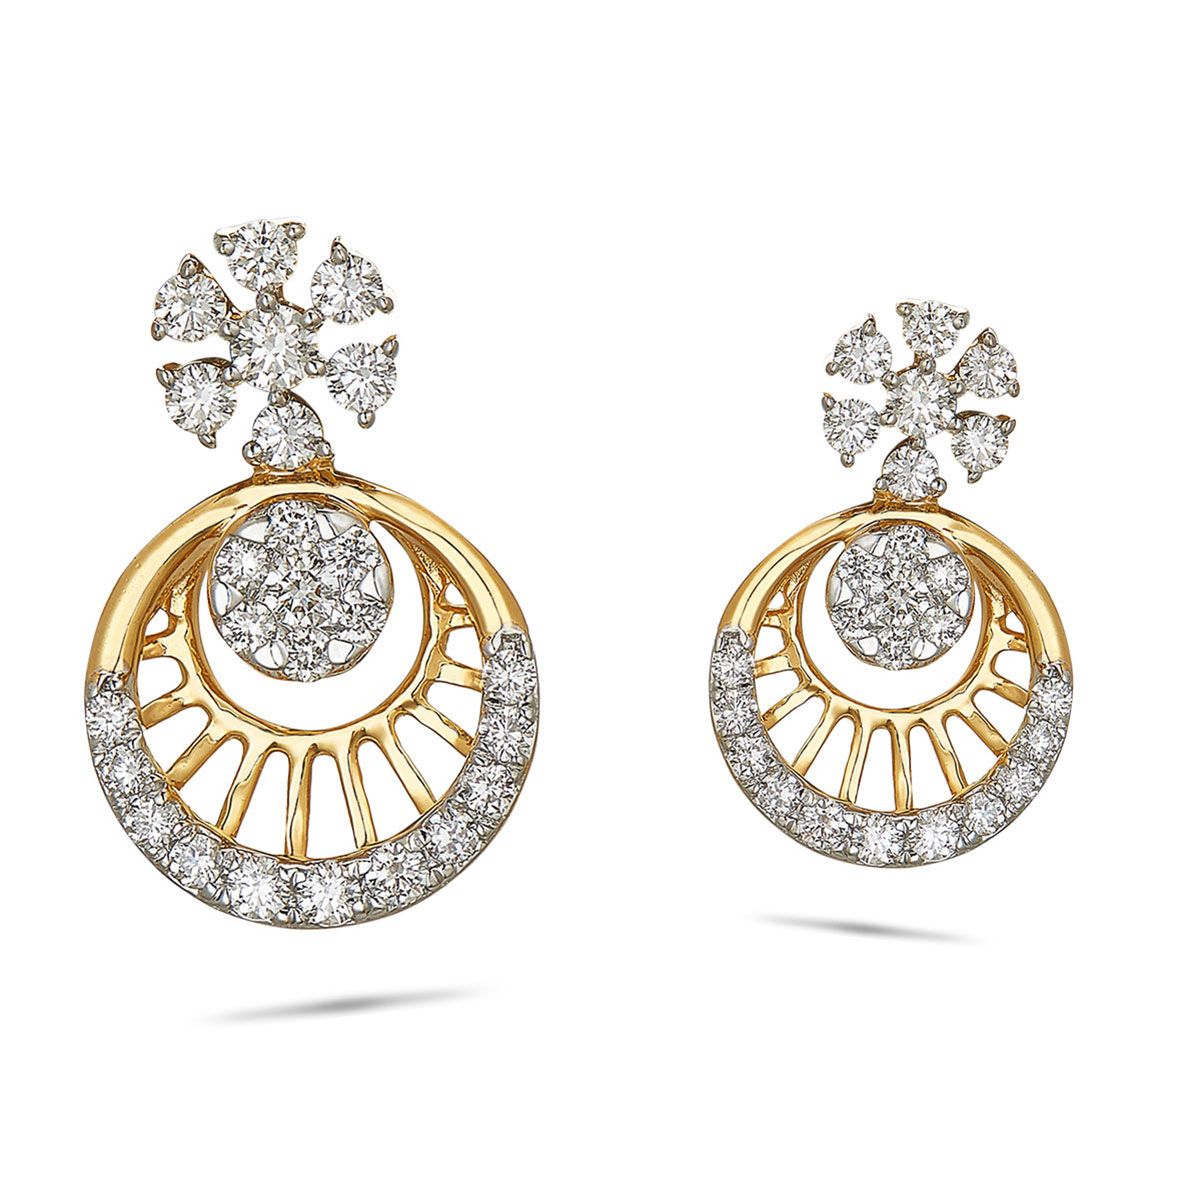 Discover more than 79 earrings design with diamonds latest ...